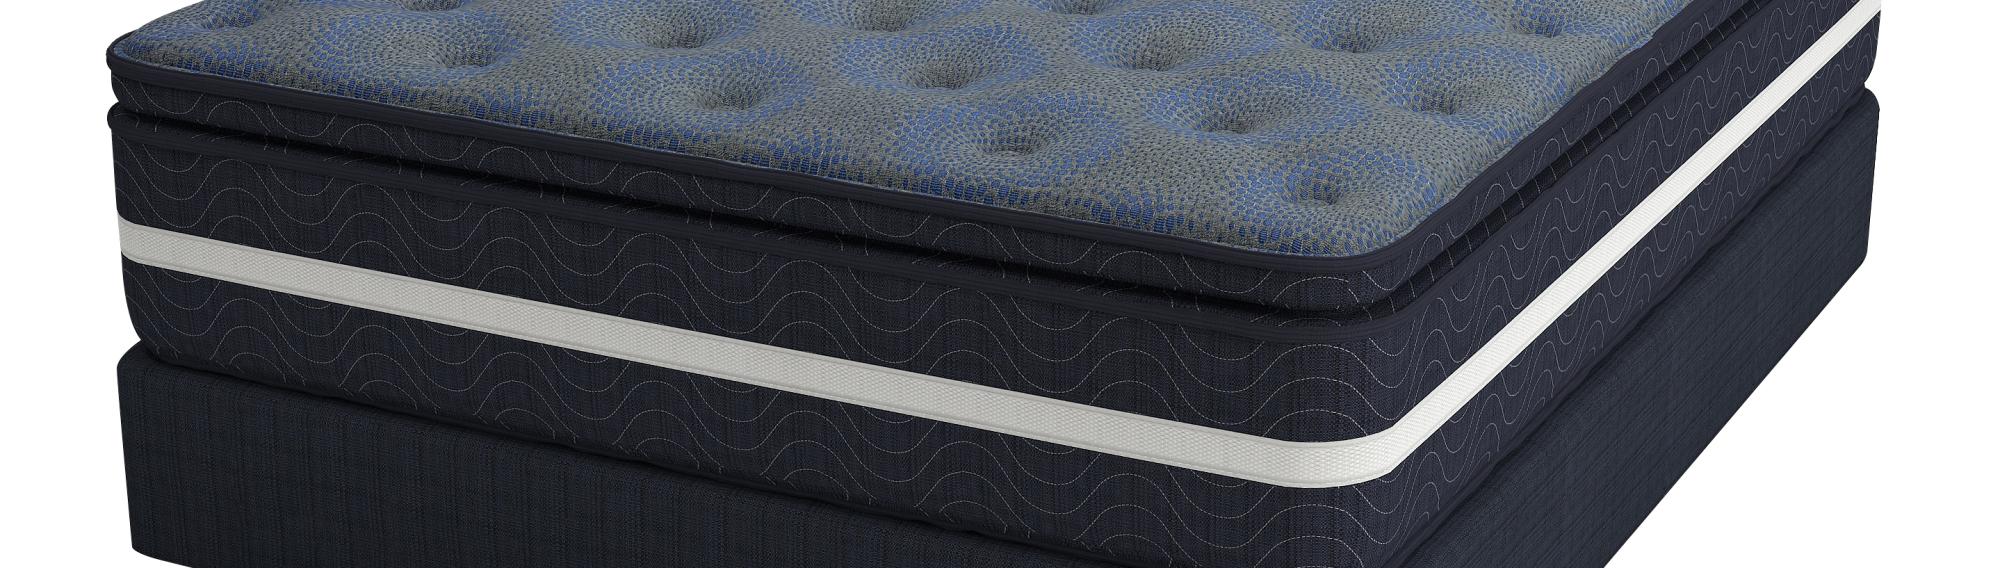 Image of a plush, affordable queen mattress from Superior Rent to Own